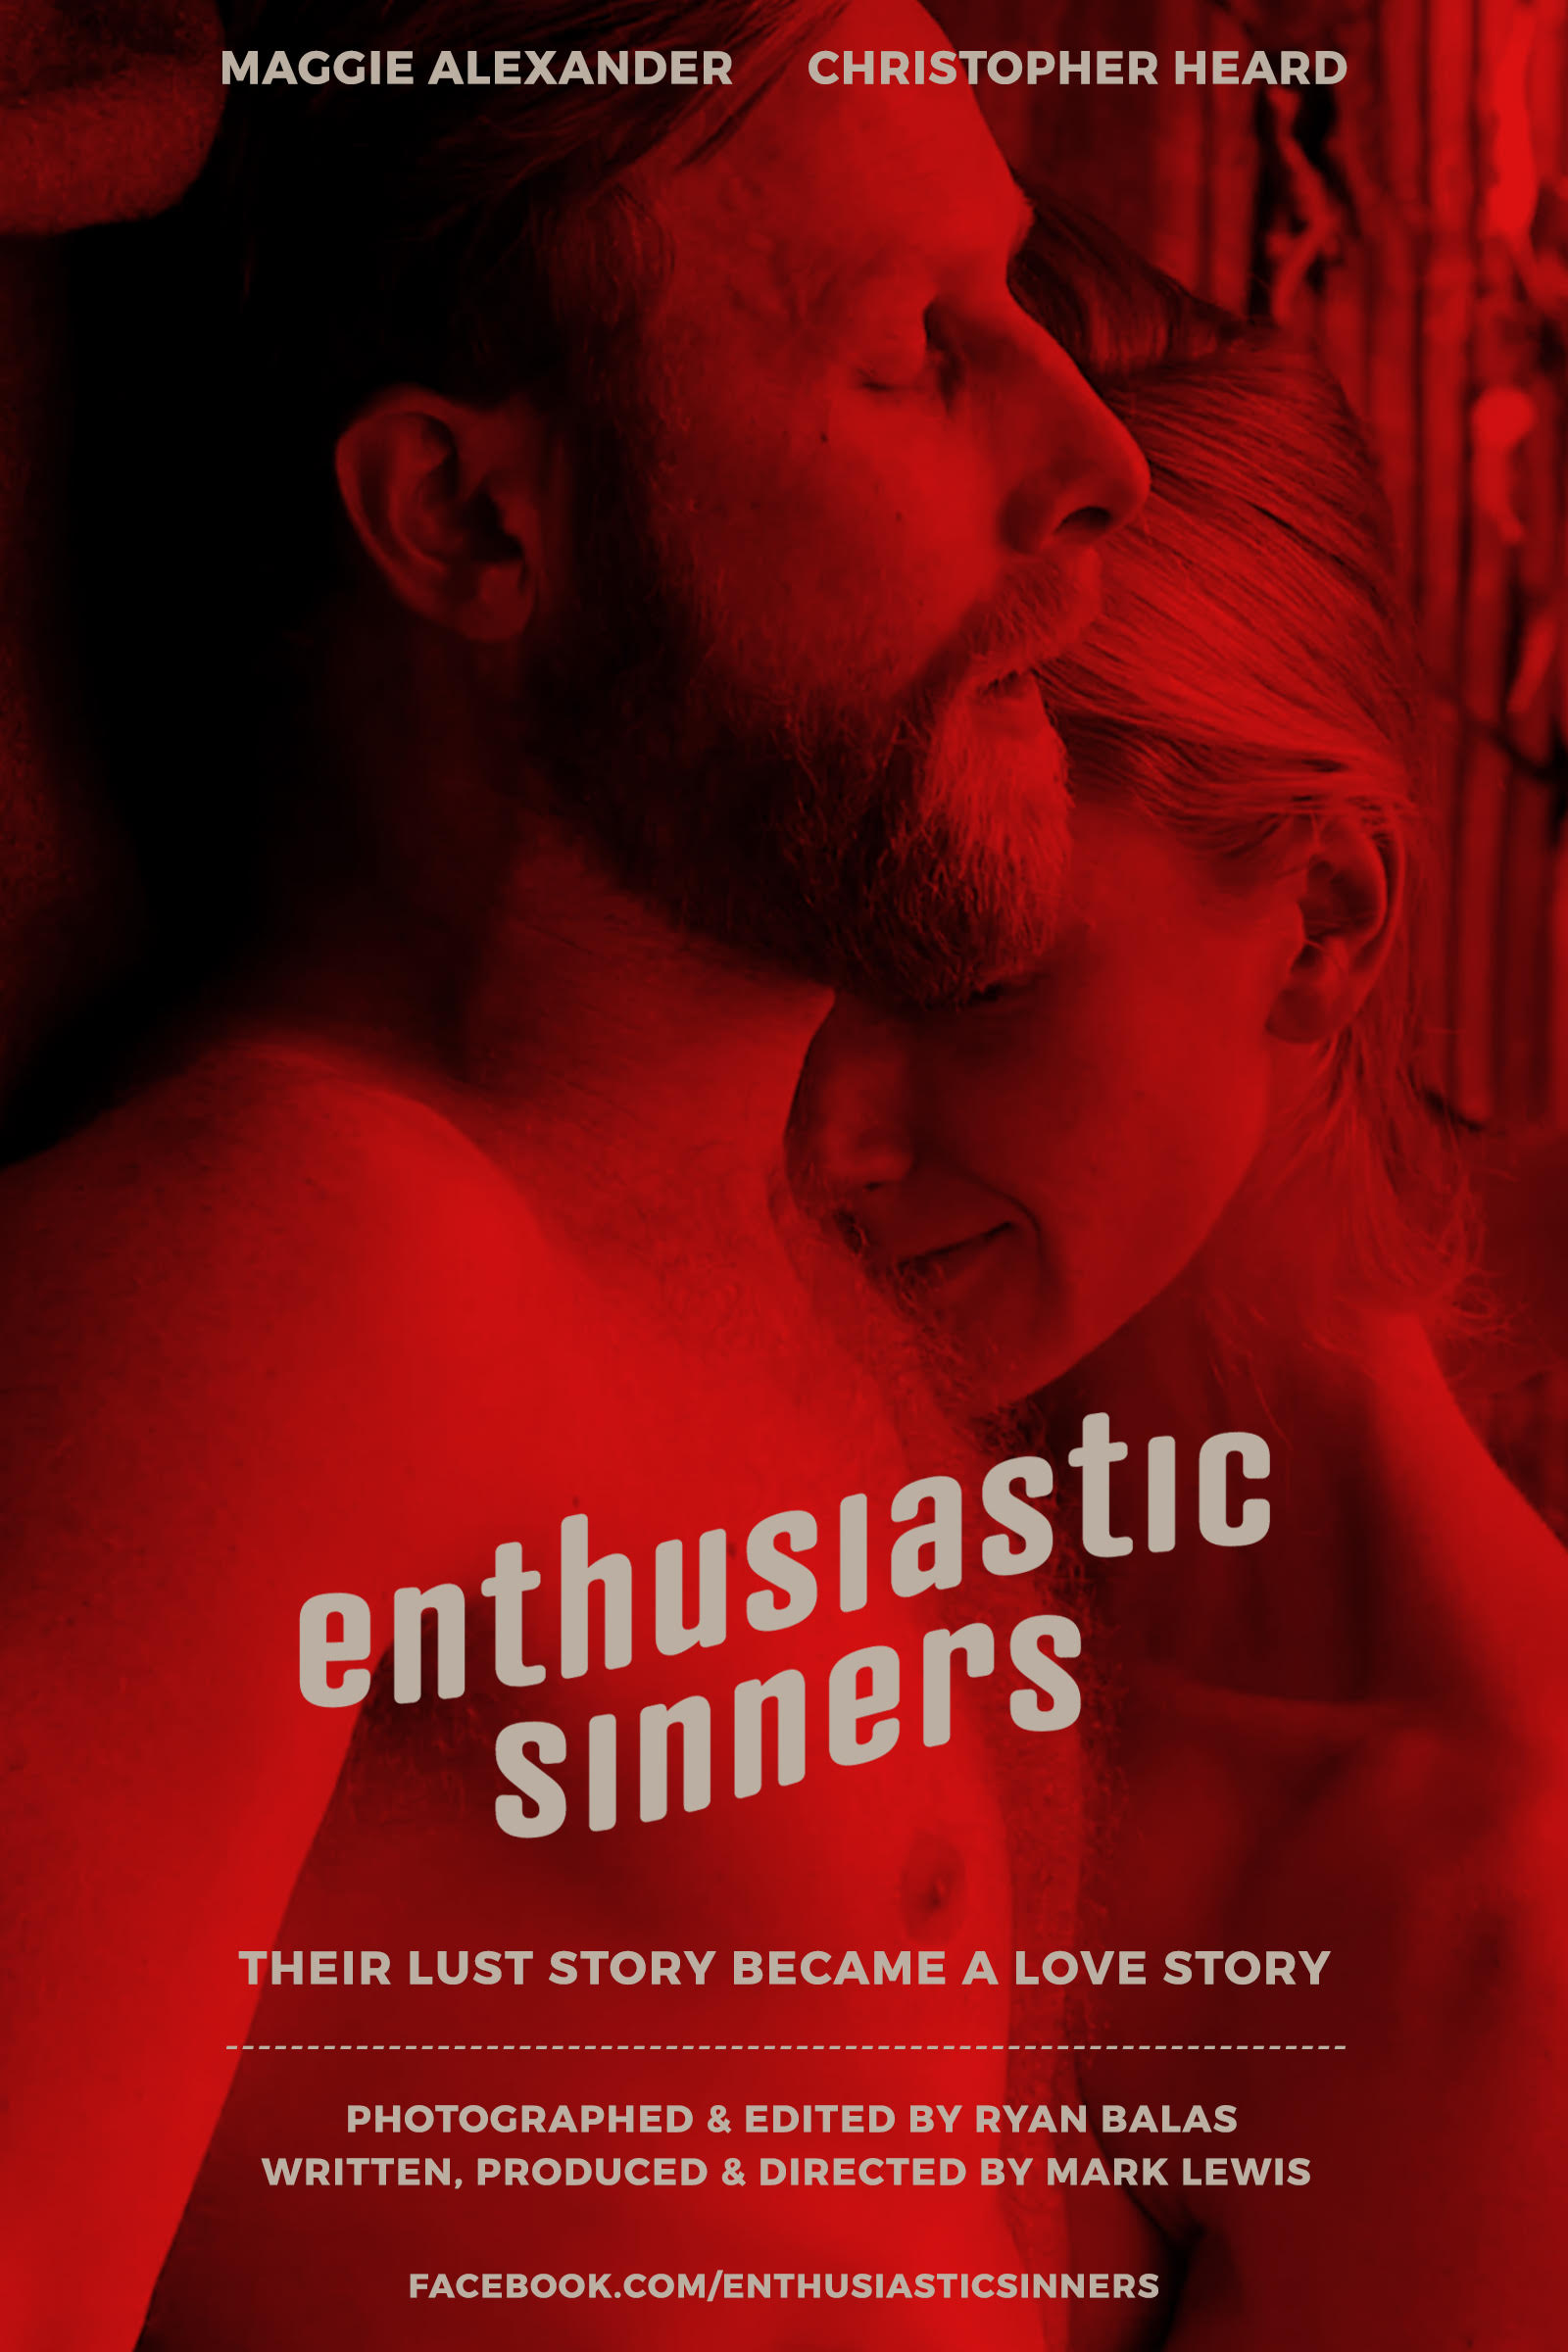 andrew camper share enthusiastic sinners full movie photos